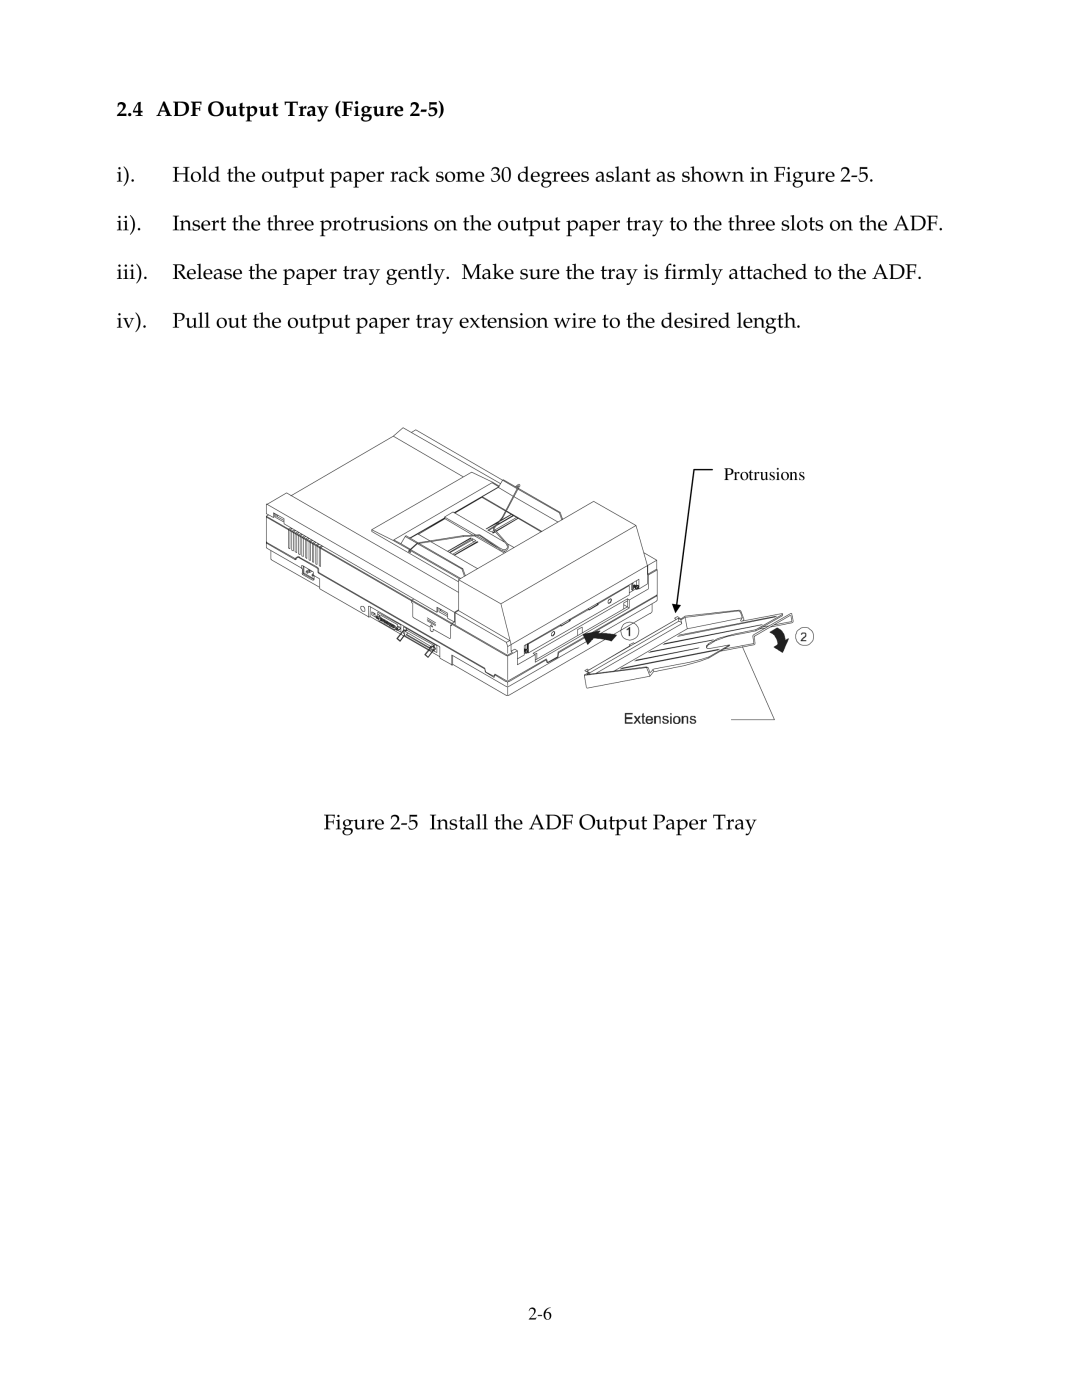 Fujitsu 15C user manual ADF Output Tray Figure, Hold the output paper rack some 30 degrees aslant as shown in Figure 